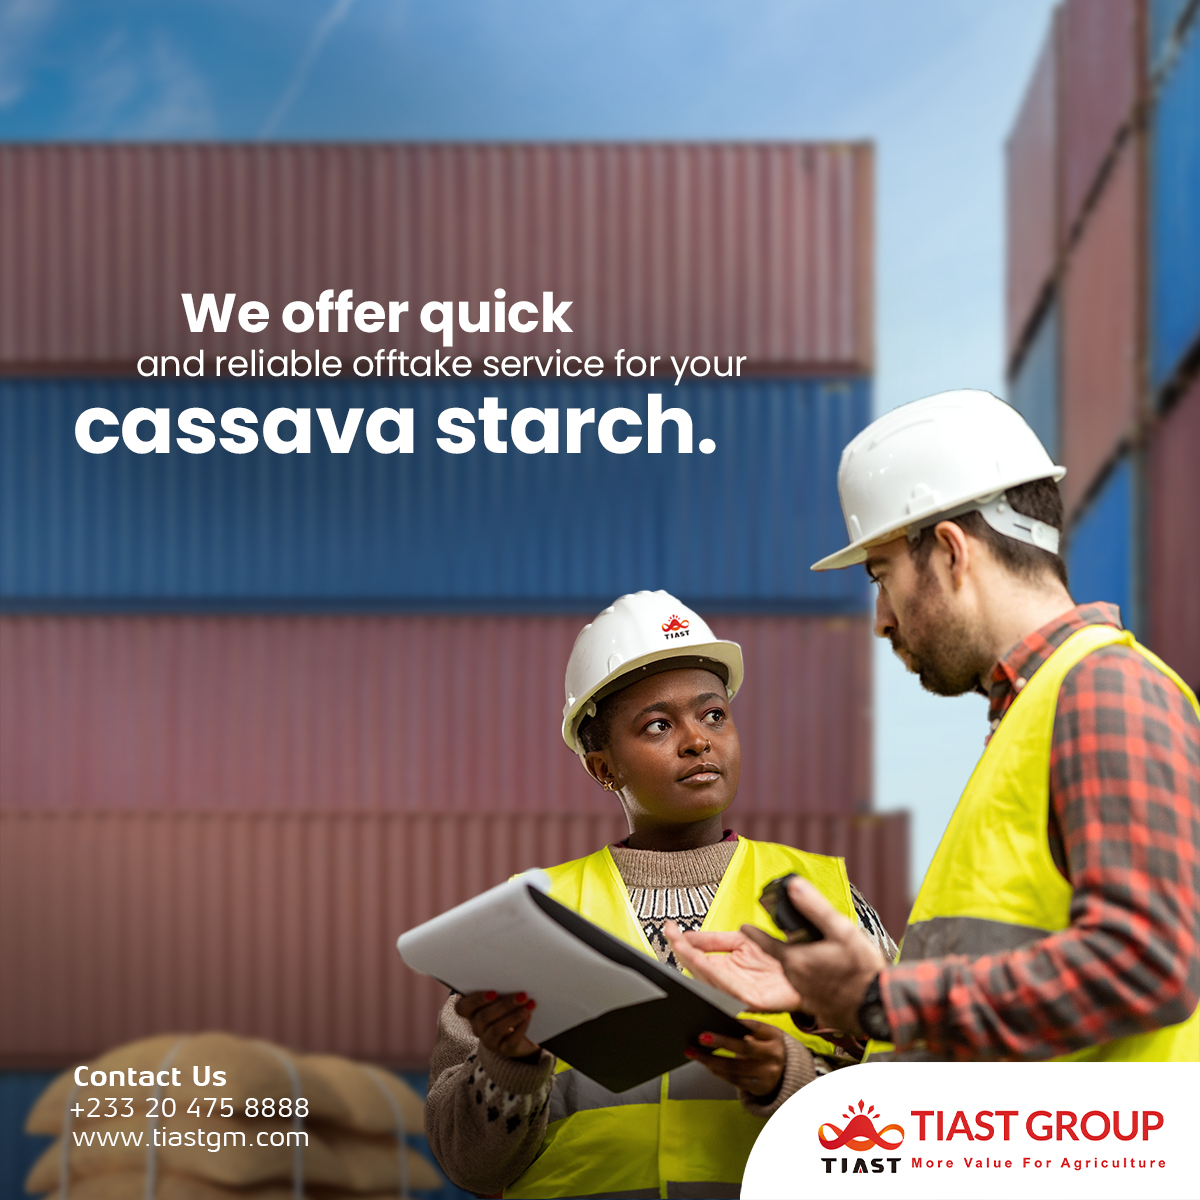 A reliable weekly offtake service.

#tiastgroup #farm #tiastgroup #agroriches #agro
#agriculture #connect #industrialisation